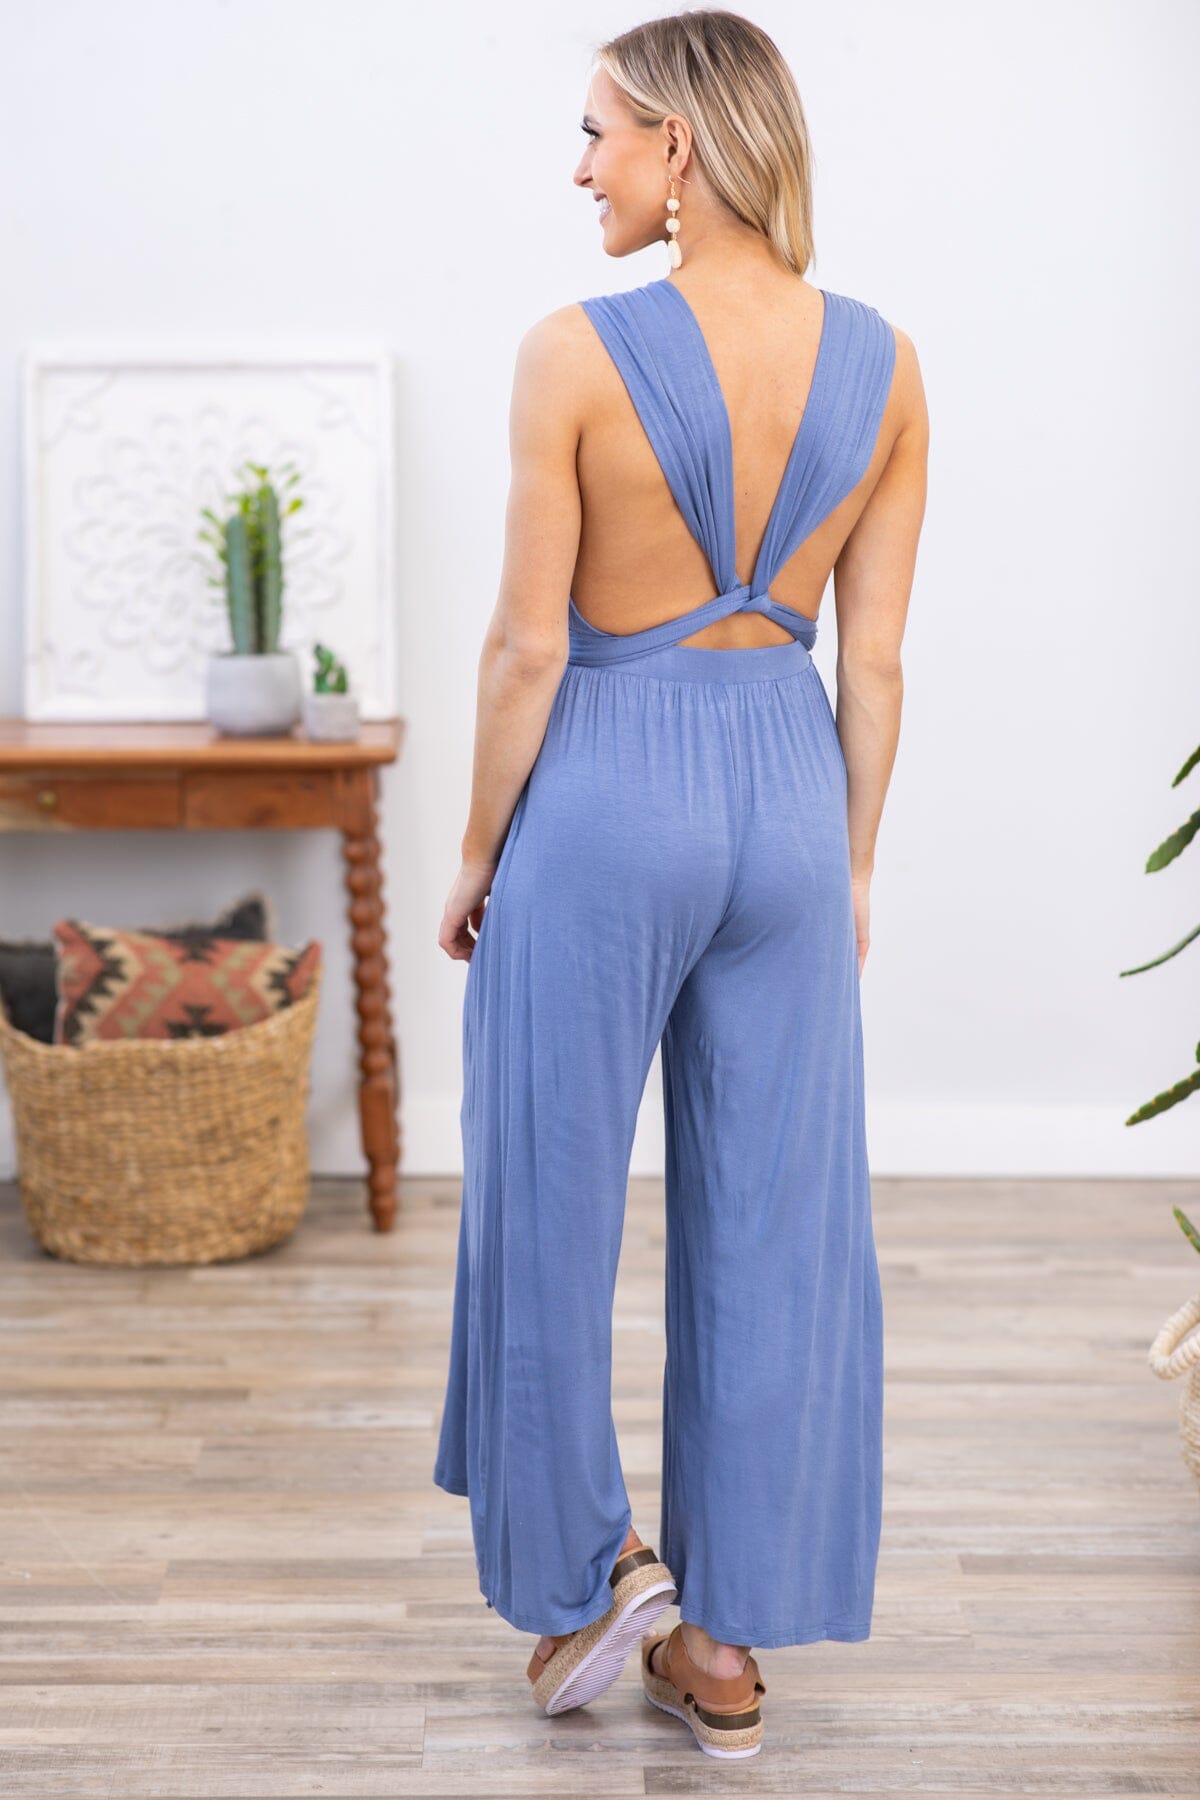 Dusty Blue Convertible Strap Wide Leg Jumpsuit - Filly Flair